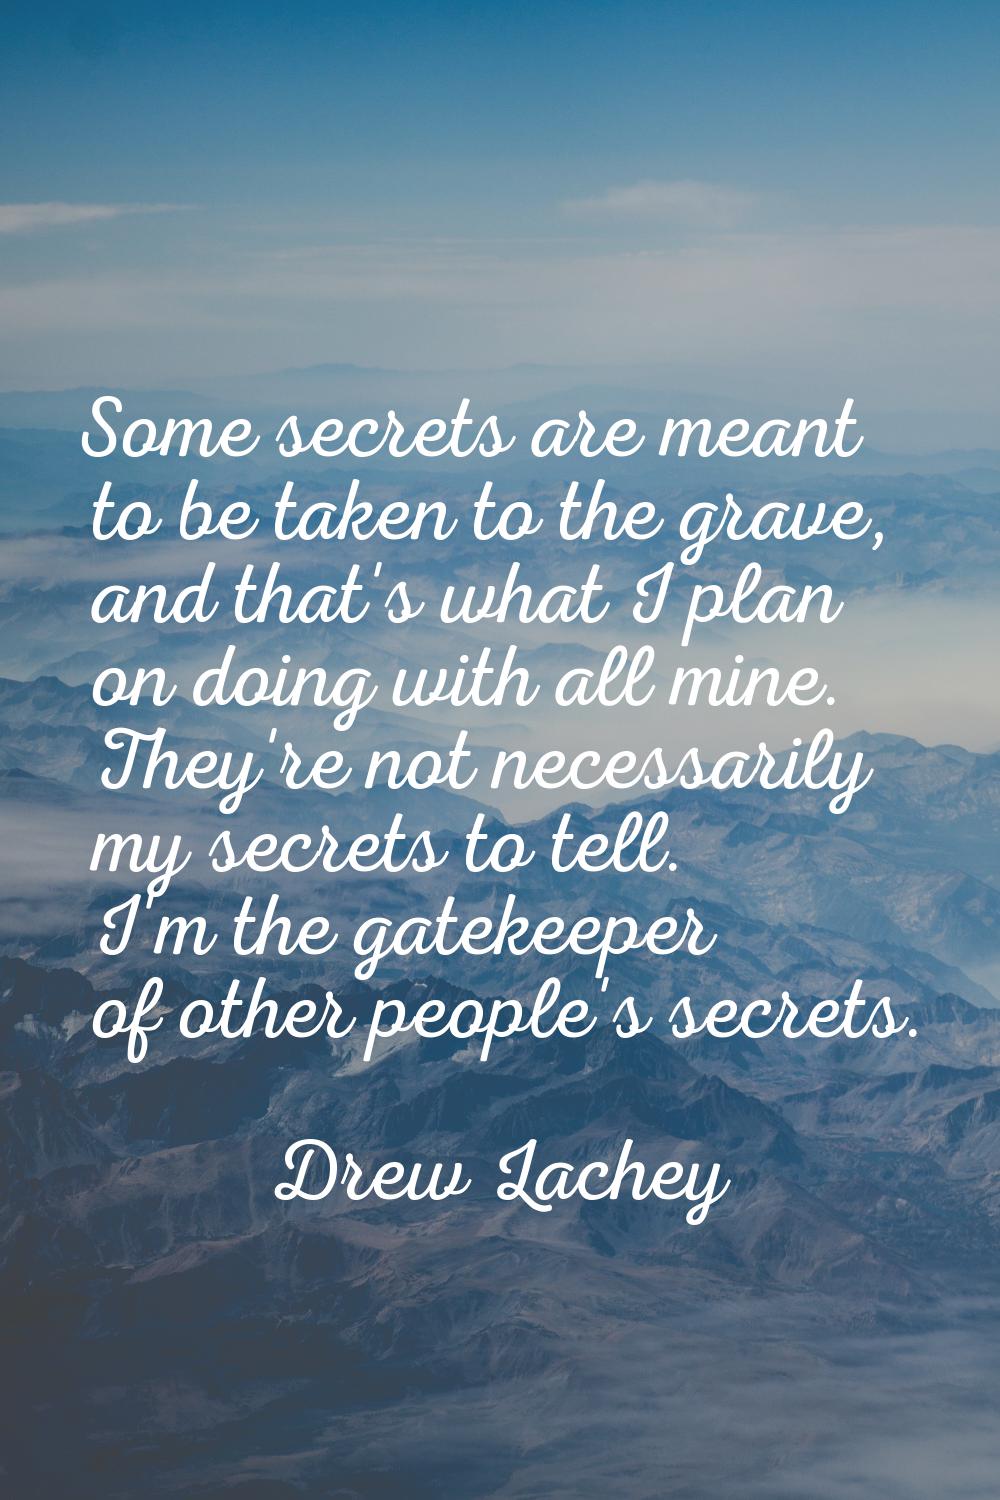 Some secrets are meant to be taken to the grave, and that's what I plan on doing with all mine. The